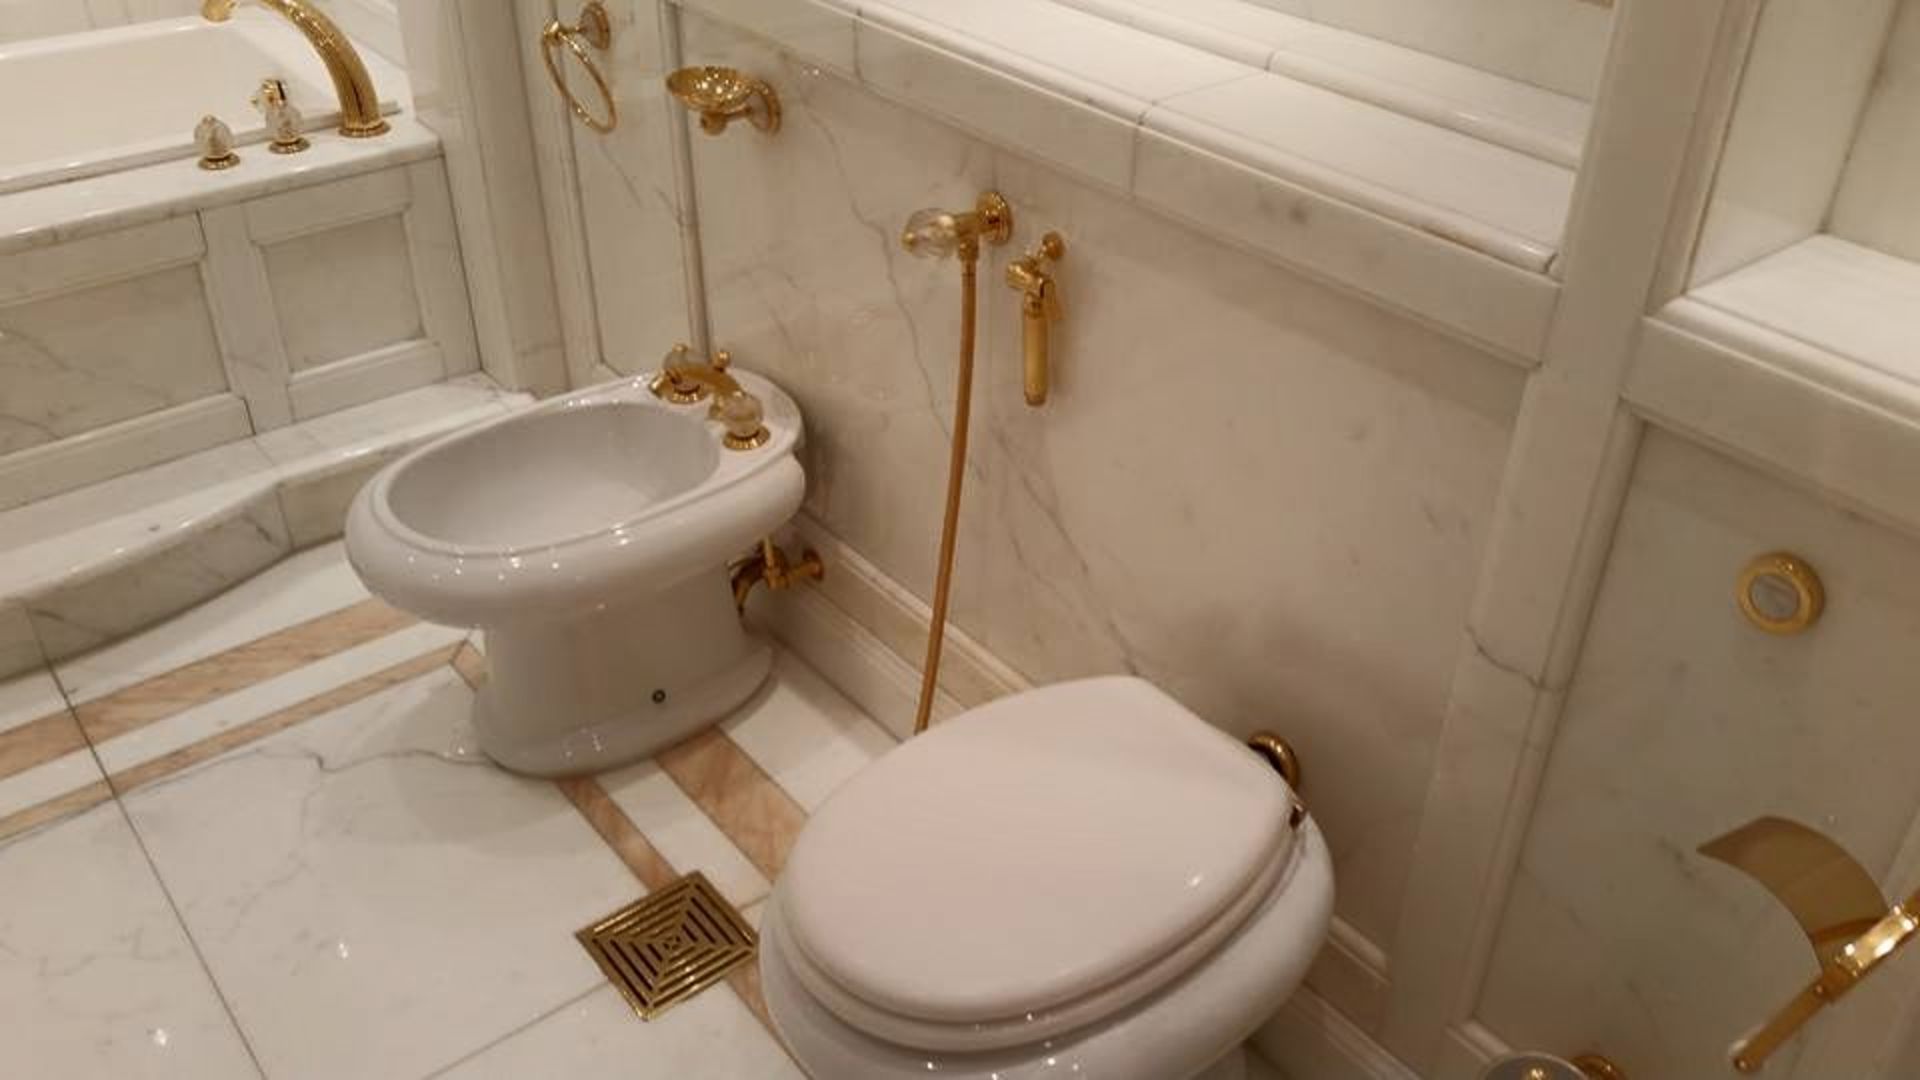 Ensuite bath, vanity unit, bidet and WC bathroom accessories and furniture from Baldi Home Jewels - Image 2 of 6